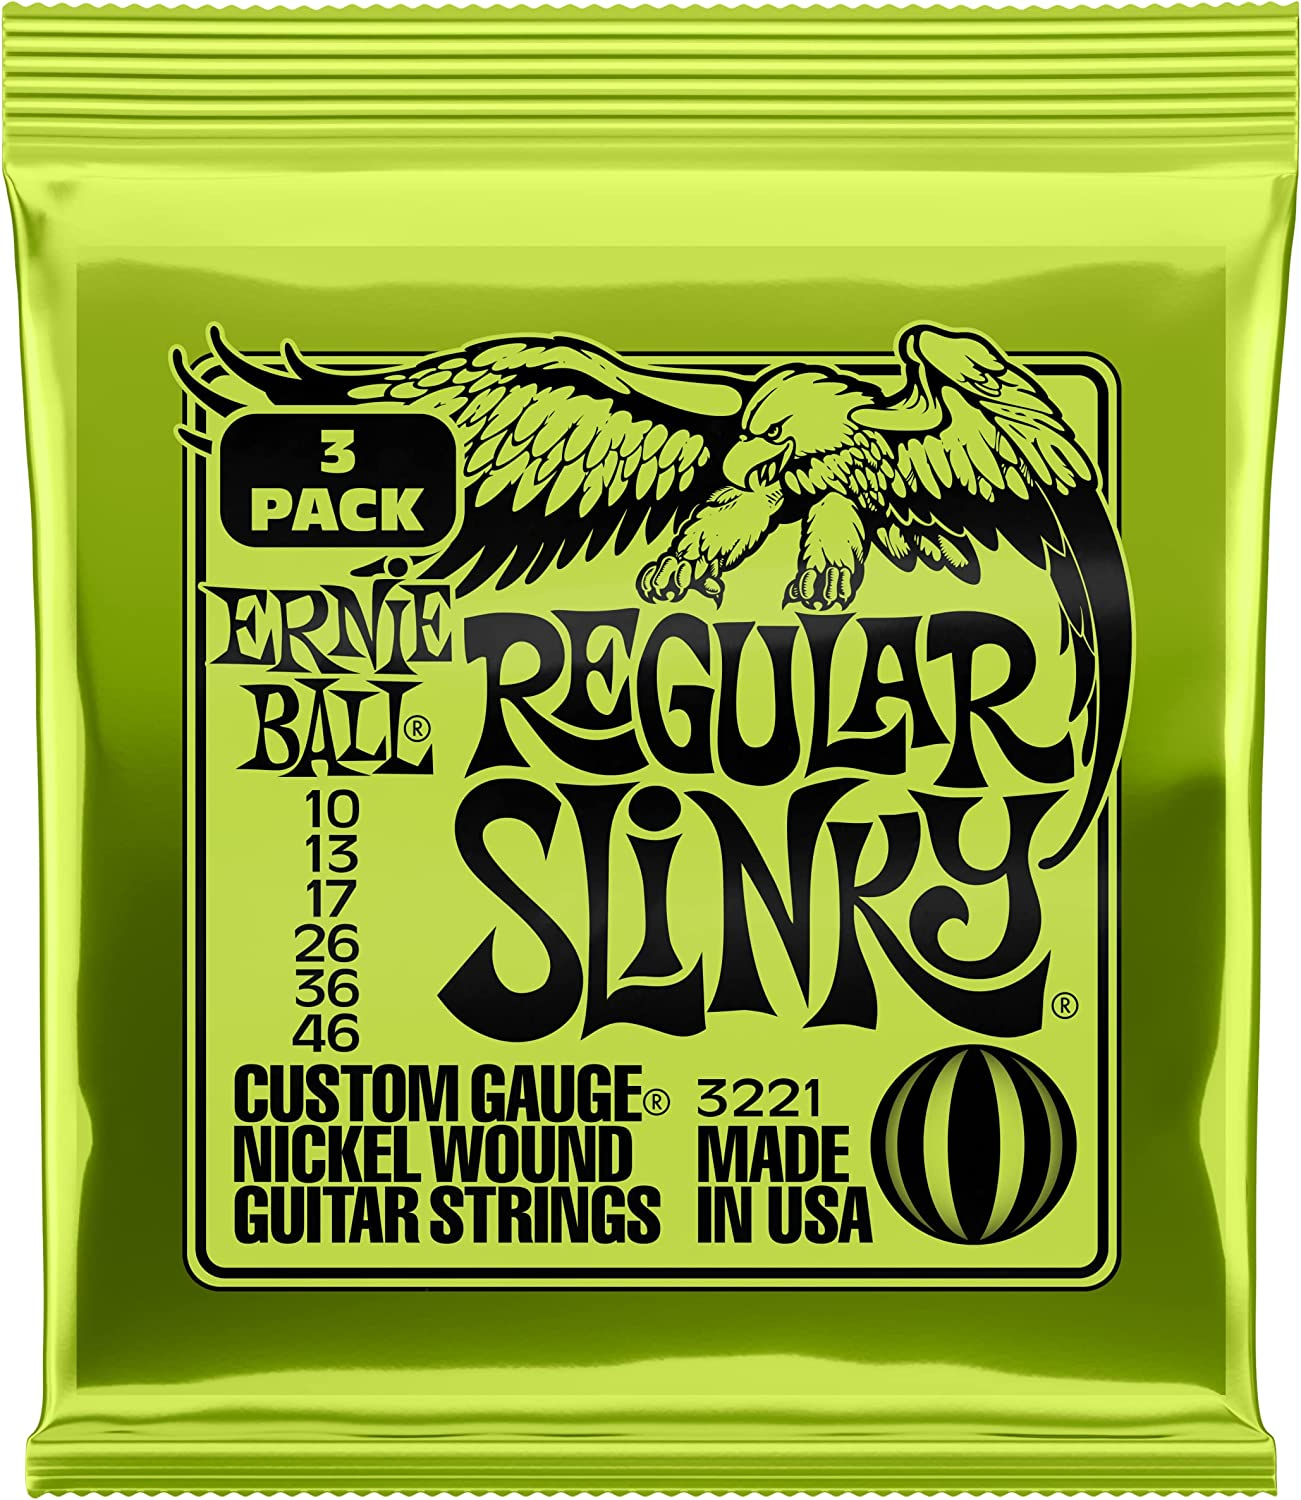 Ernie Ball Regular Slinky Nickel Wound Electric Guitar on a white background